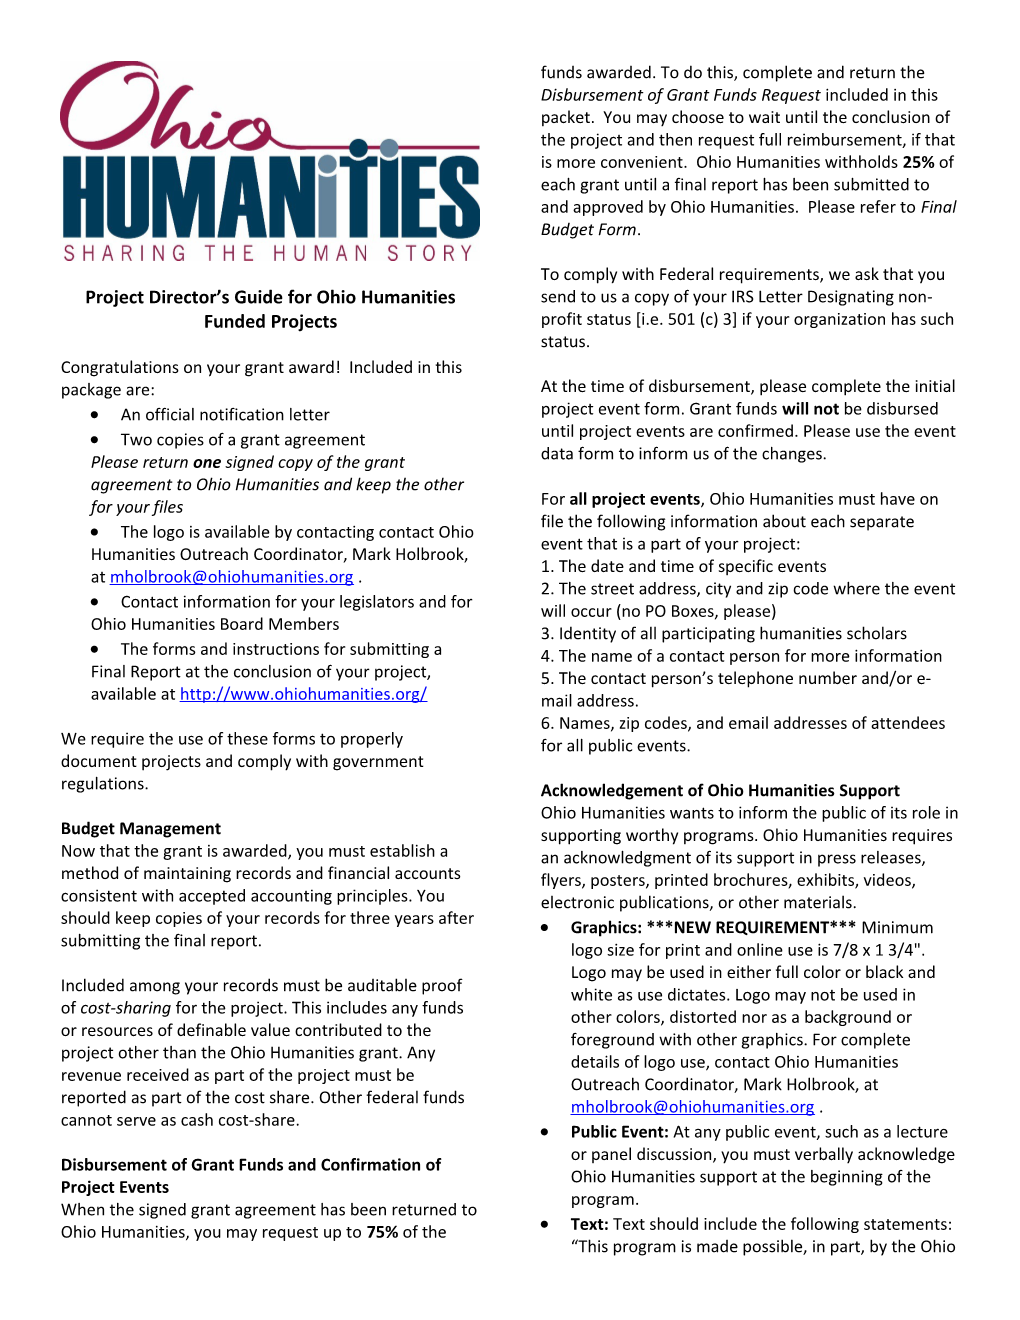 Project Director S Guide for Ohio Humanities Funded Projects